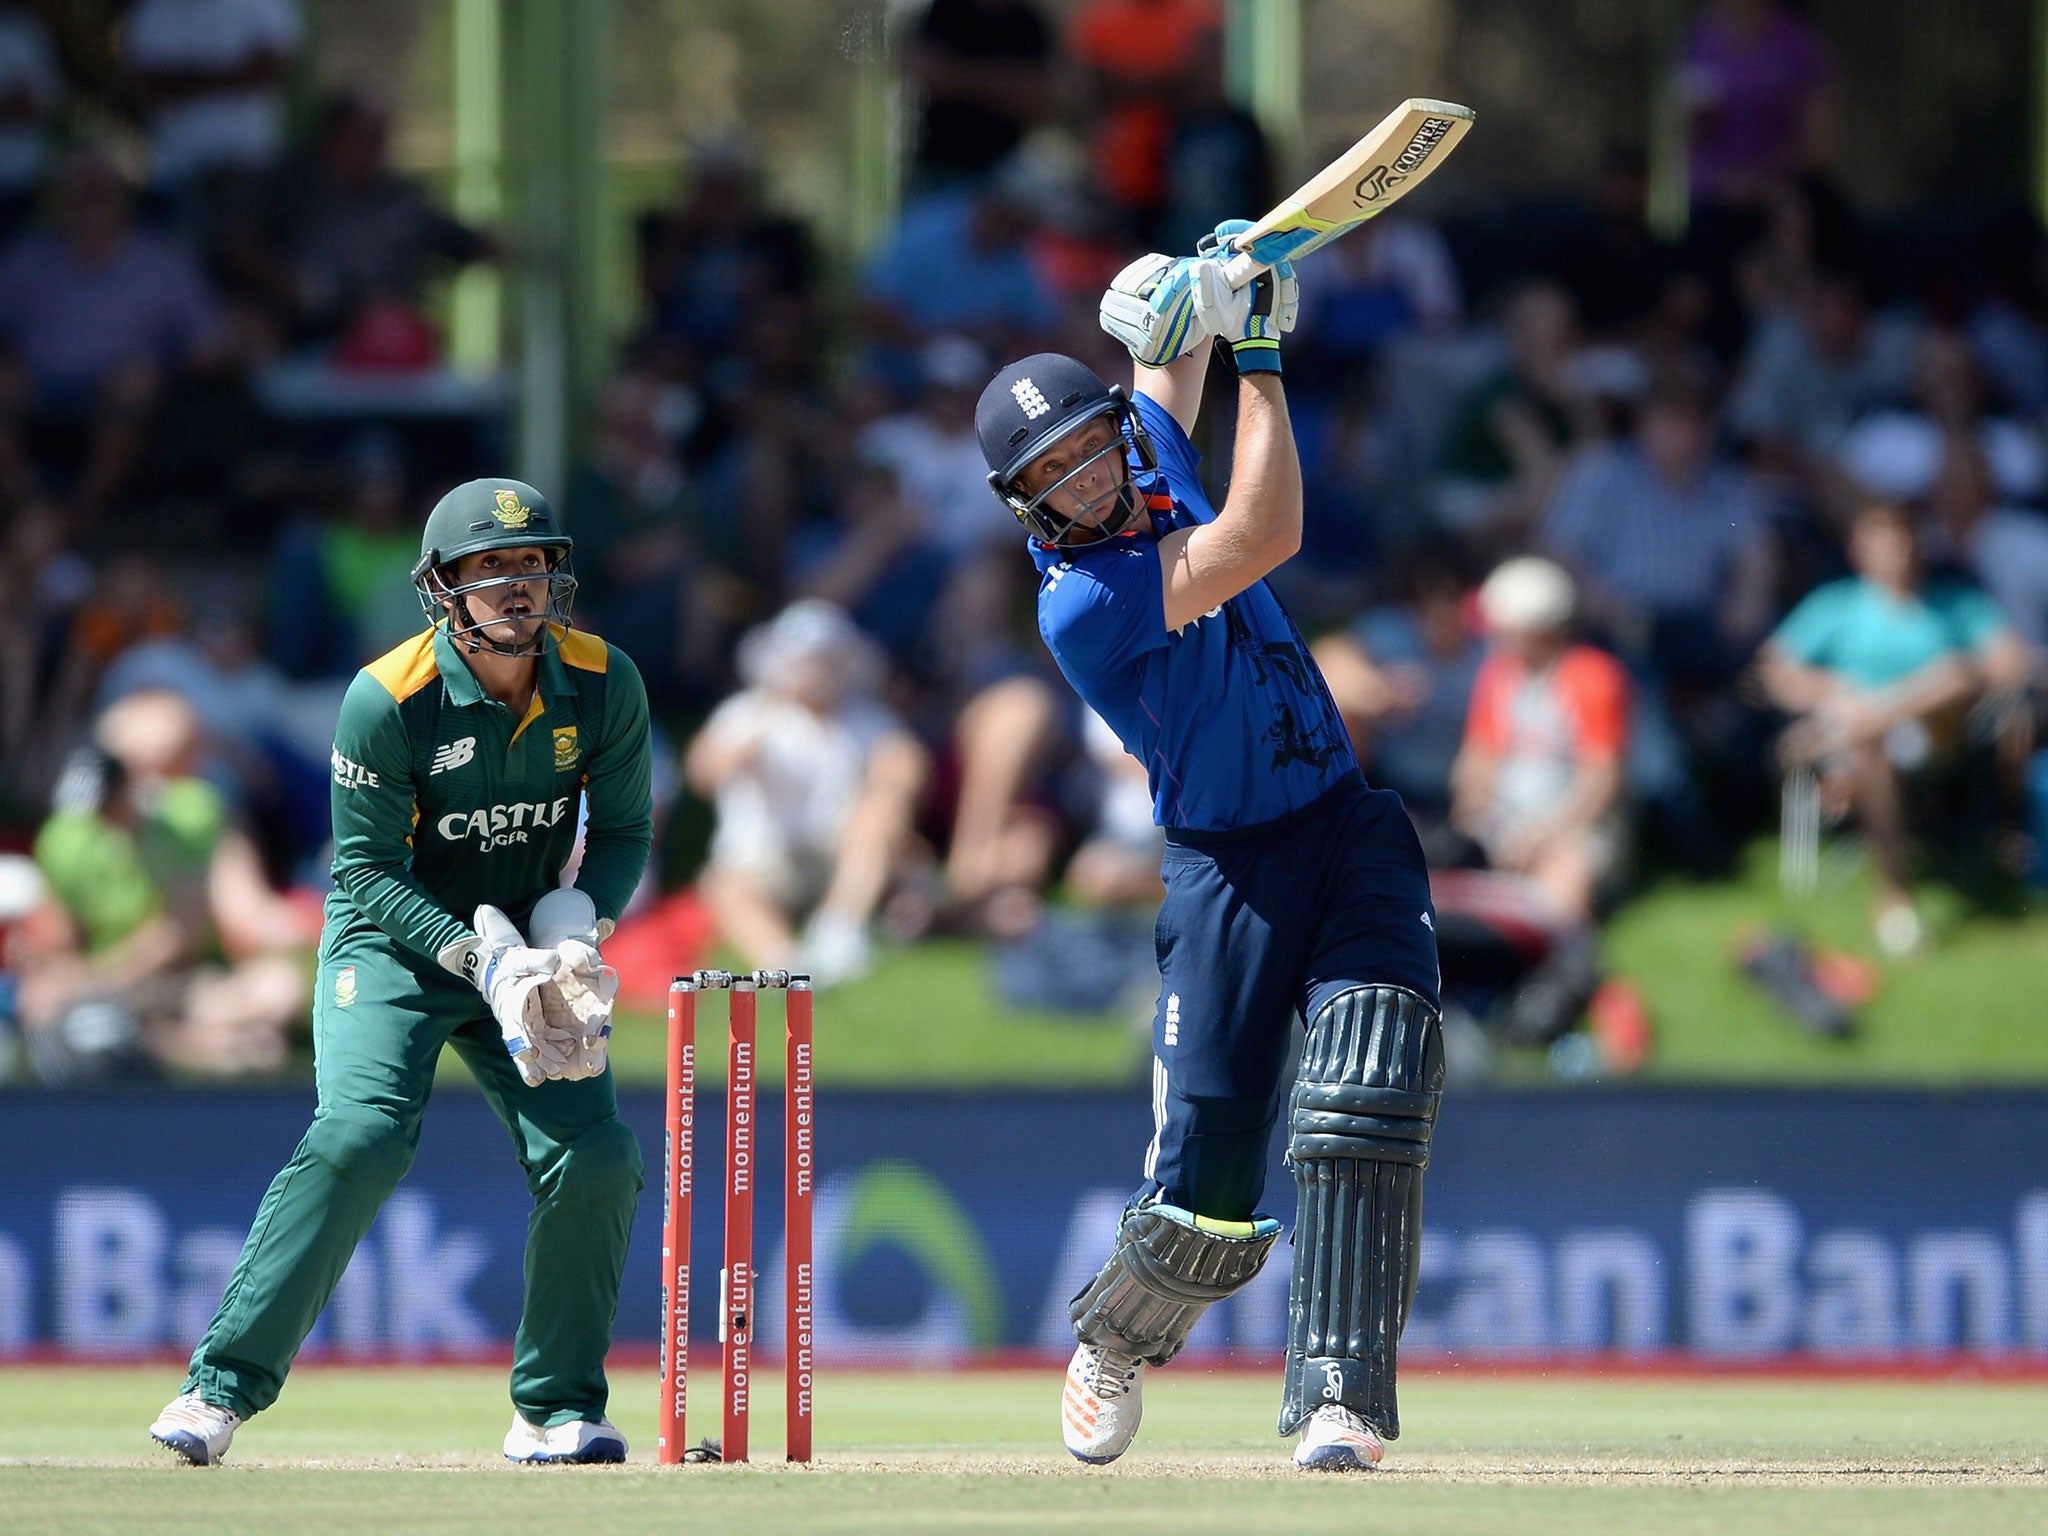 Buttler in action during the 1st Momentum ODI match between South Africa and England at Mangaung Oval on February 3, 2016 in Bloemfontein